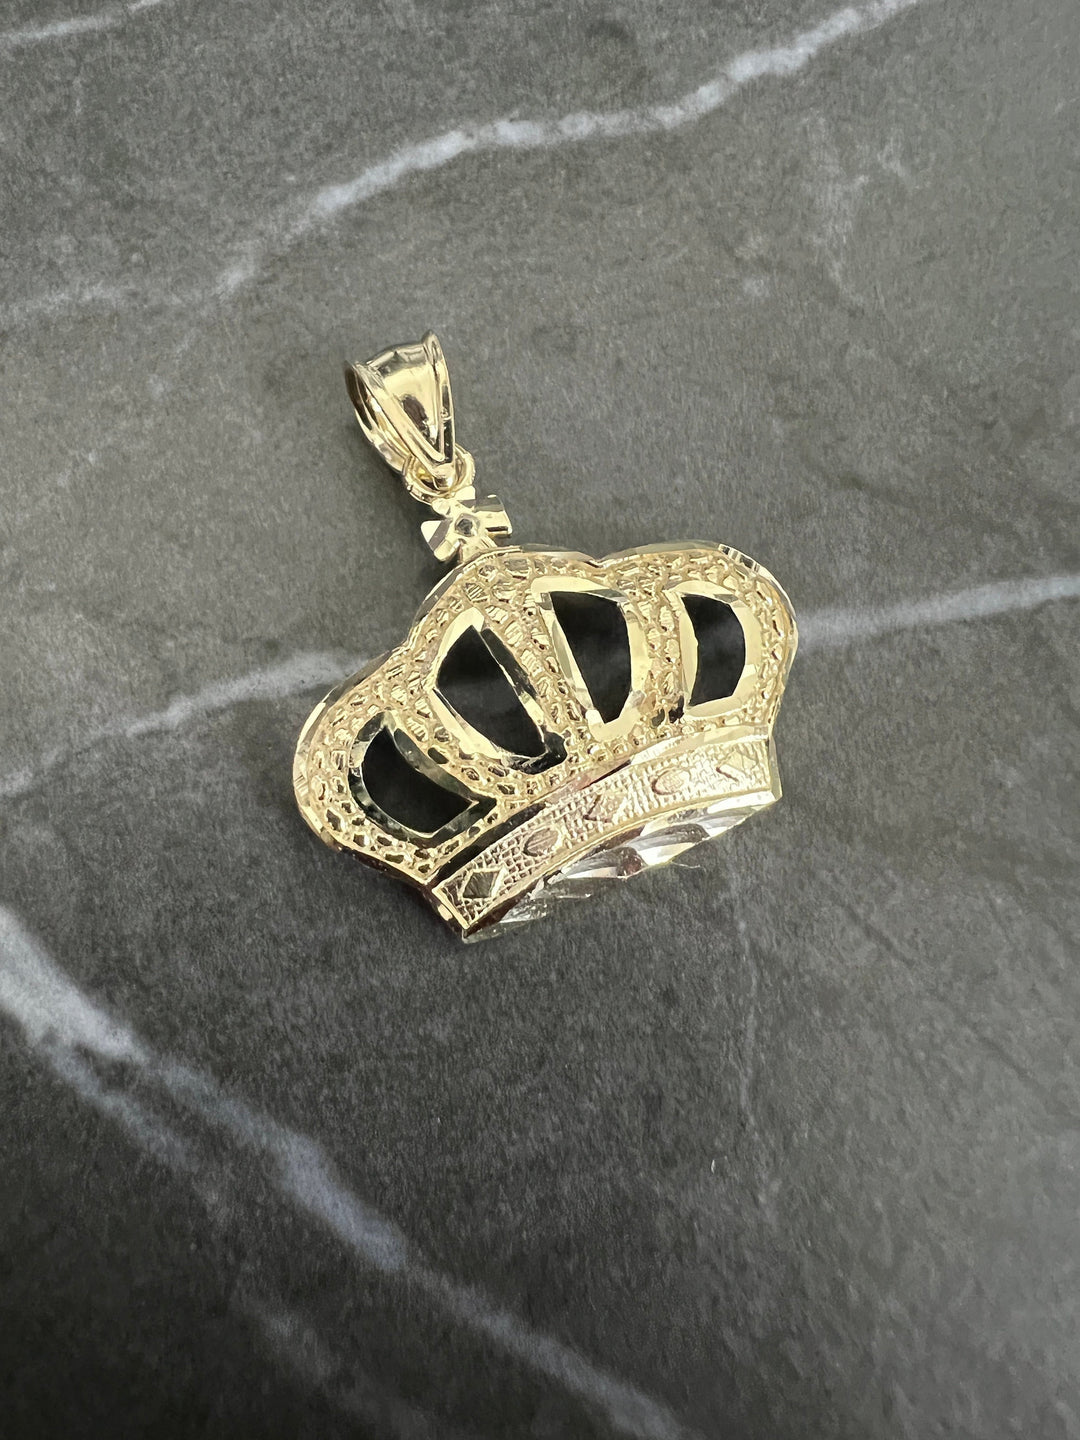 Authentic 10K Yellow Gold Diamond Cut King/Queen Crown Charm/Pendant, Textured Diamond Cut Gold Nugget Style Fine 10K Crown, Crown Gold Gift